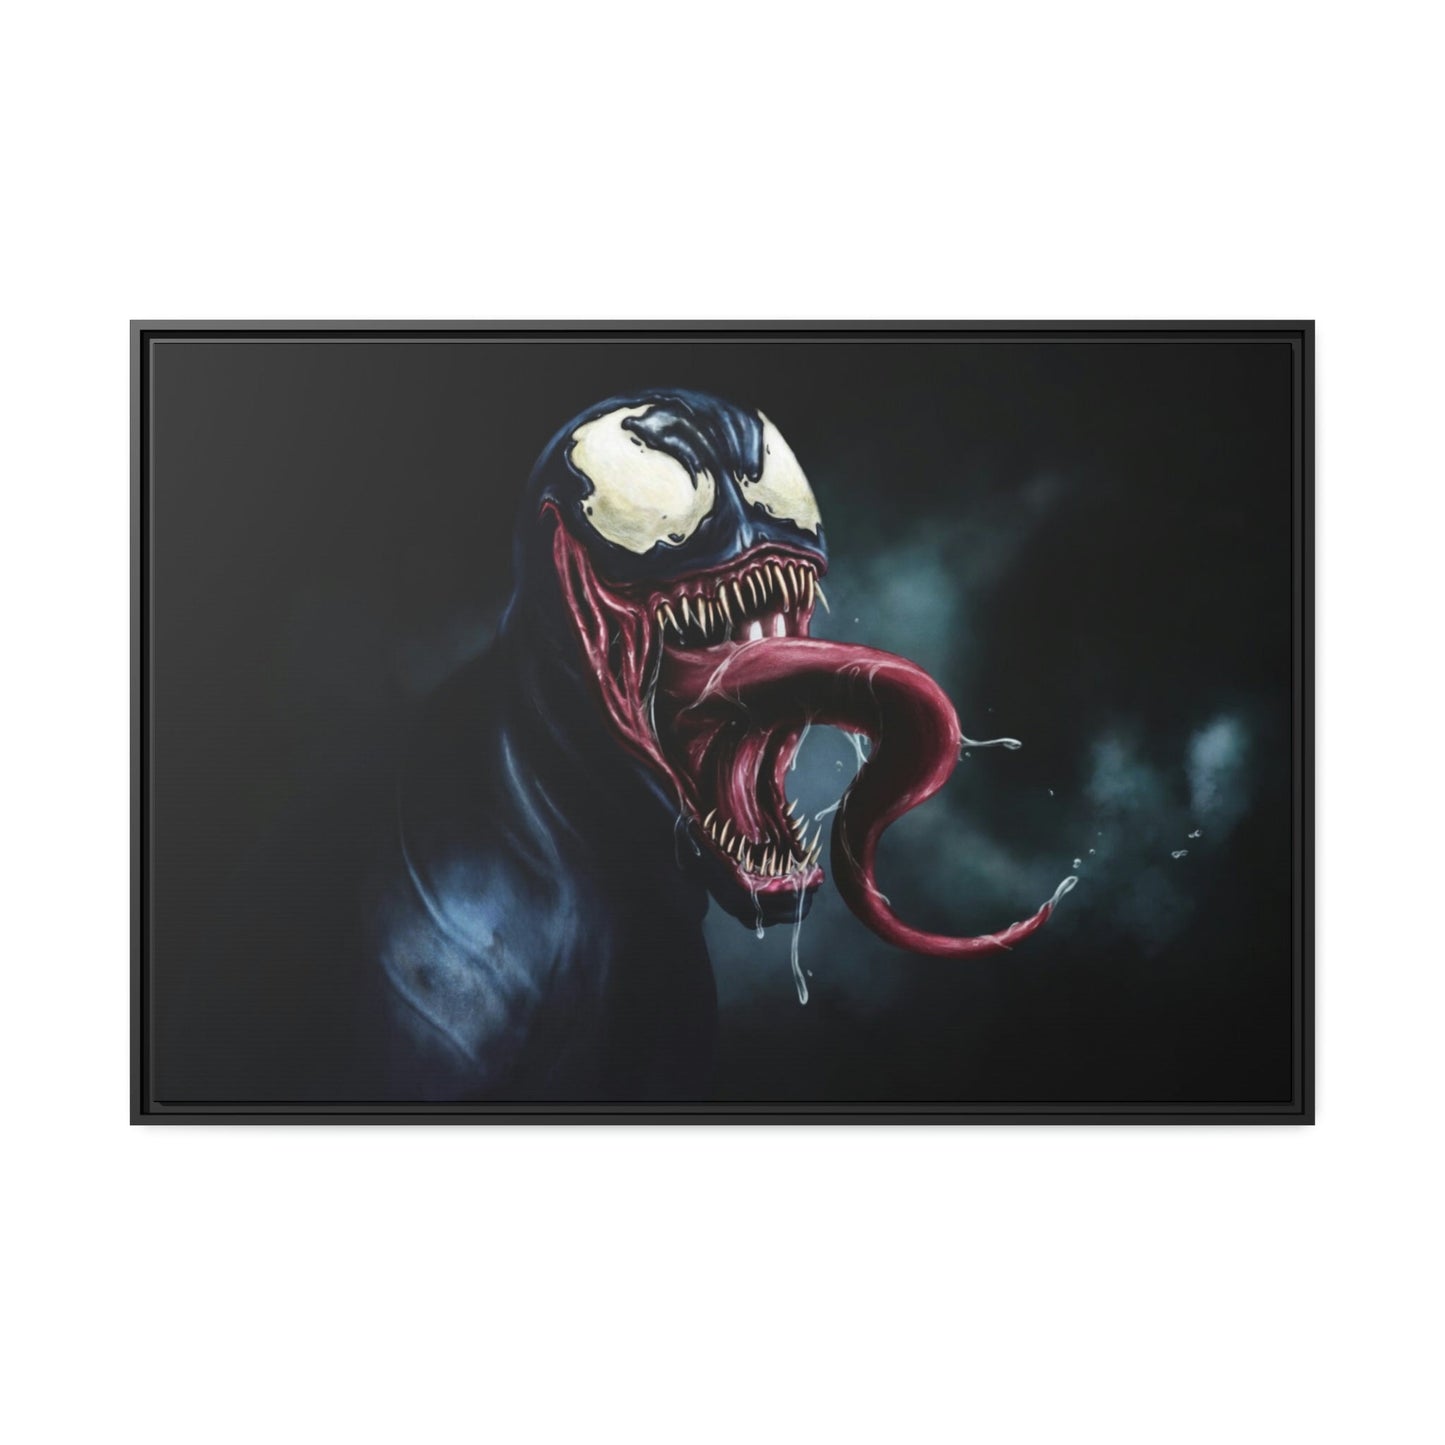 Explore New Worlds: Sci-Fi and Fantasy Framed Canvas Wall Art with Venomous Detail